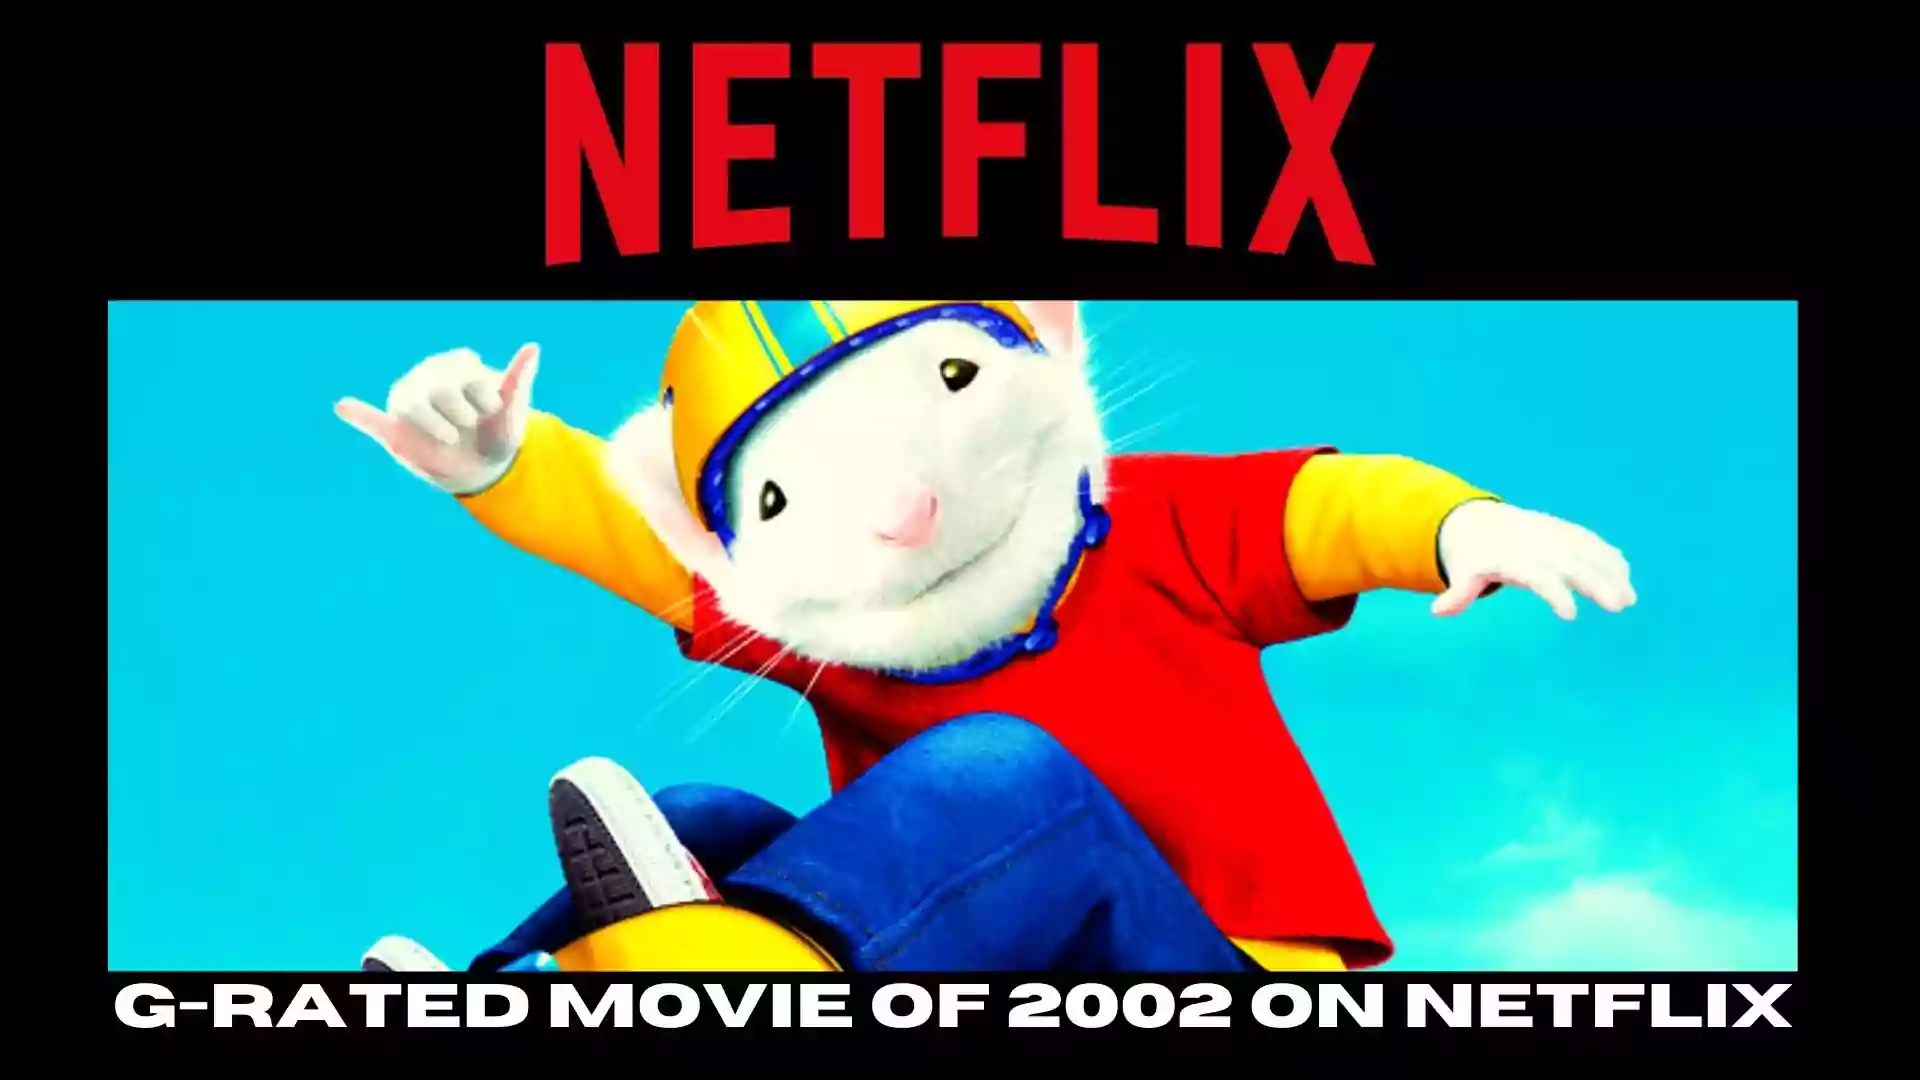 G-Rated Movie of 2002 on Netflix